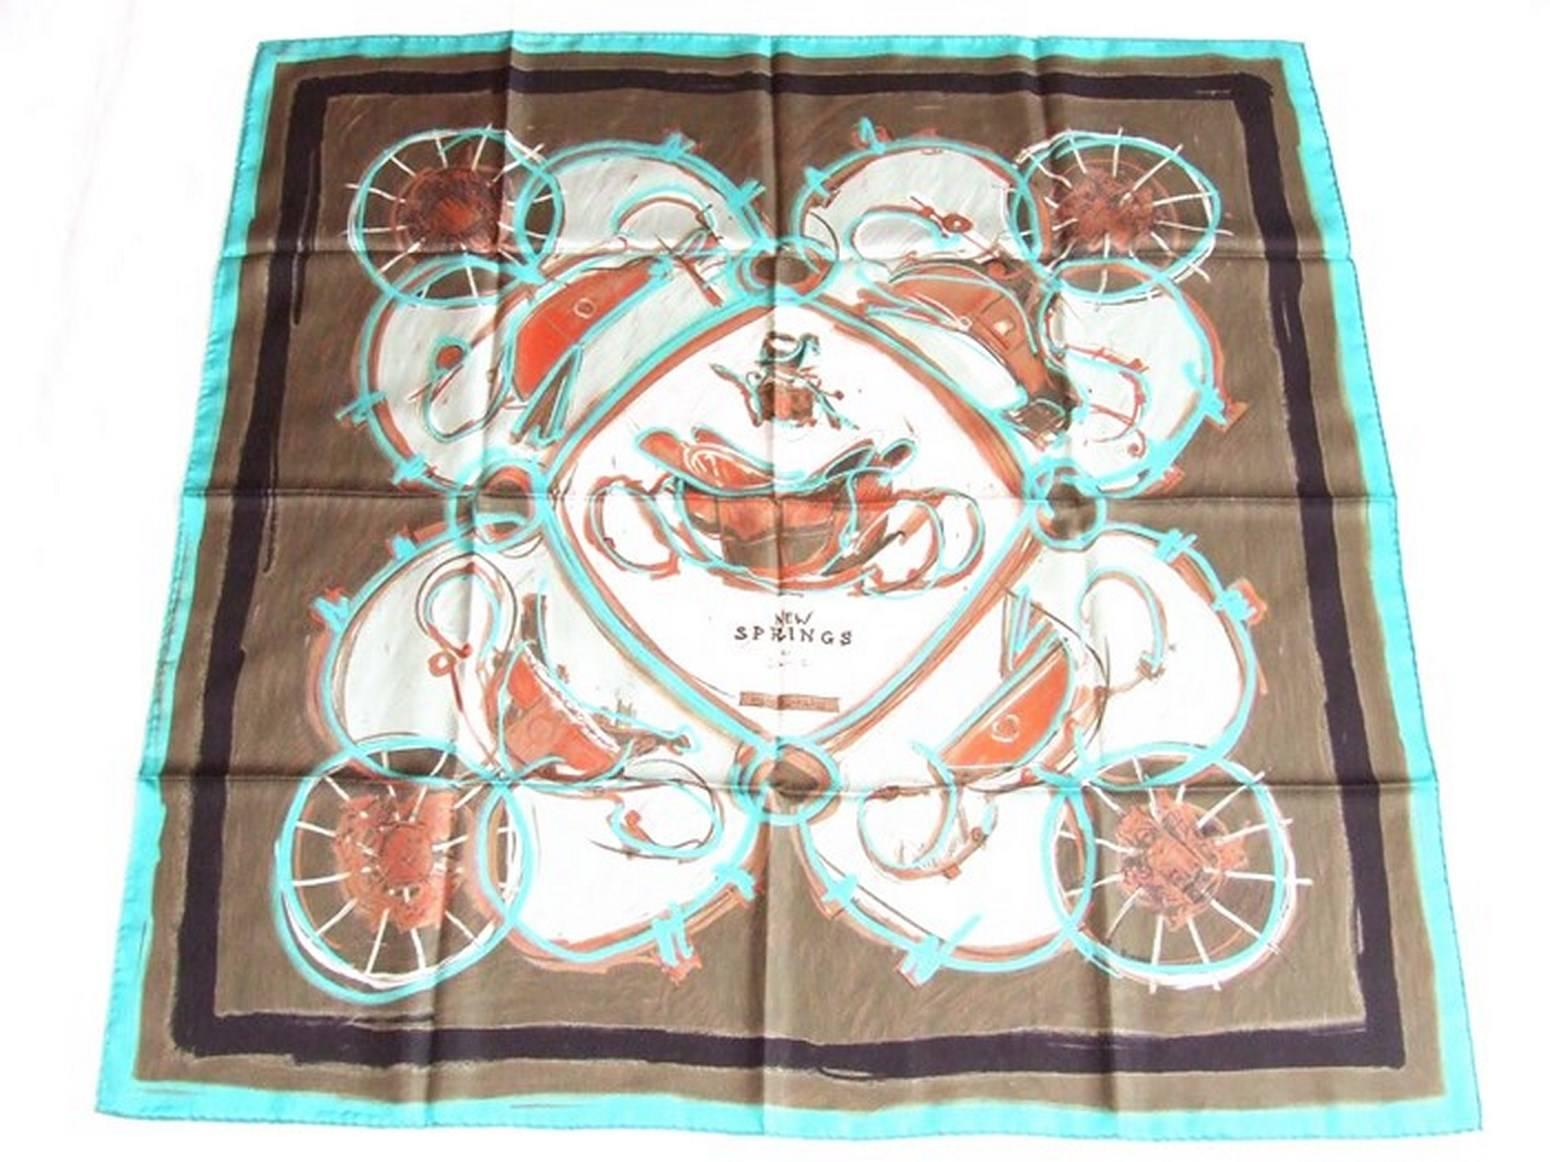 GORGEOUS AUTHENTIC HERMES SCARF

Called 